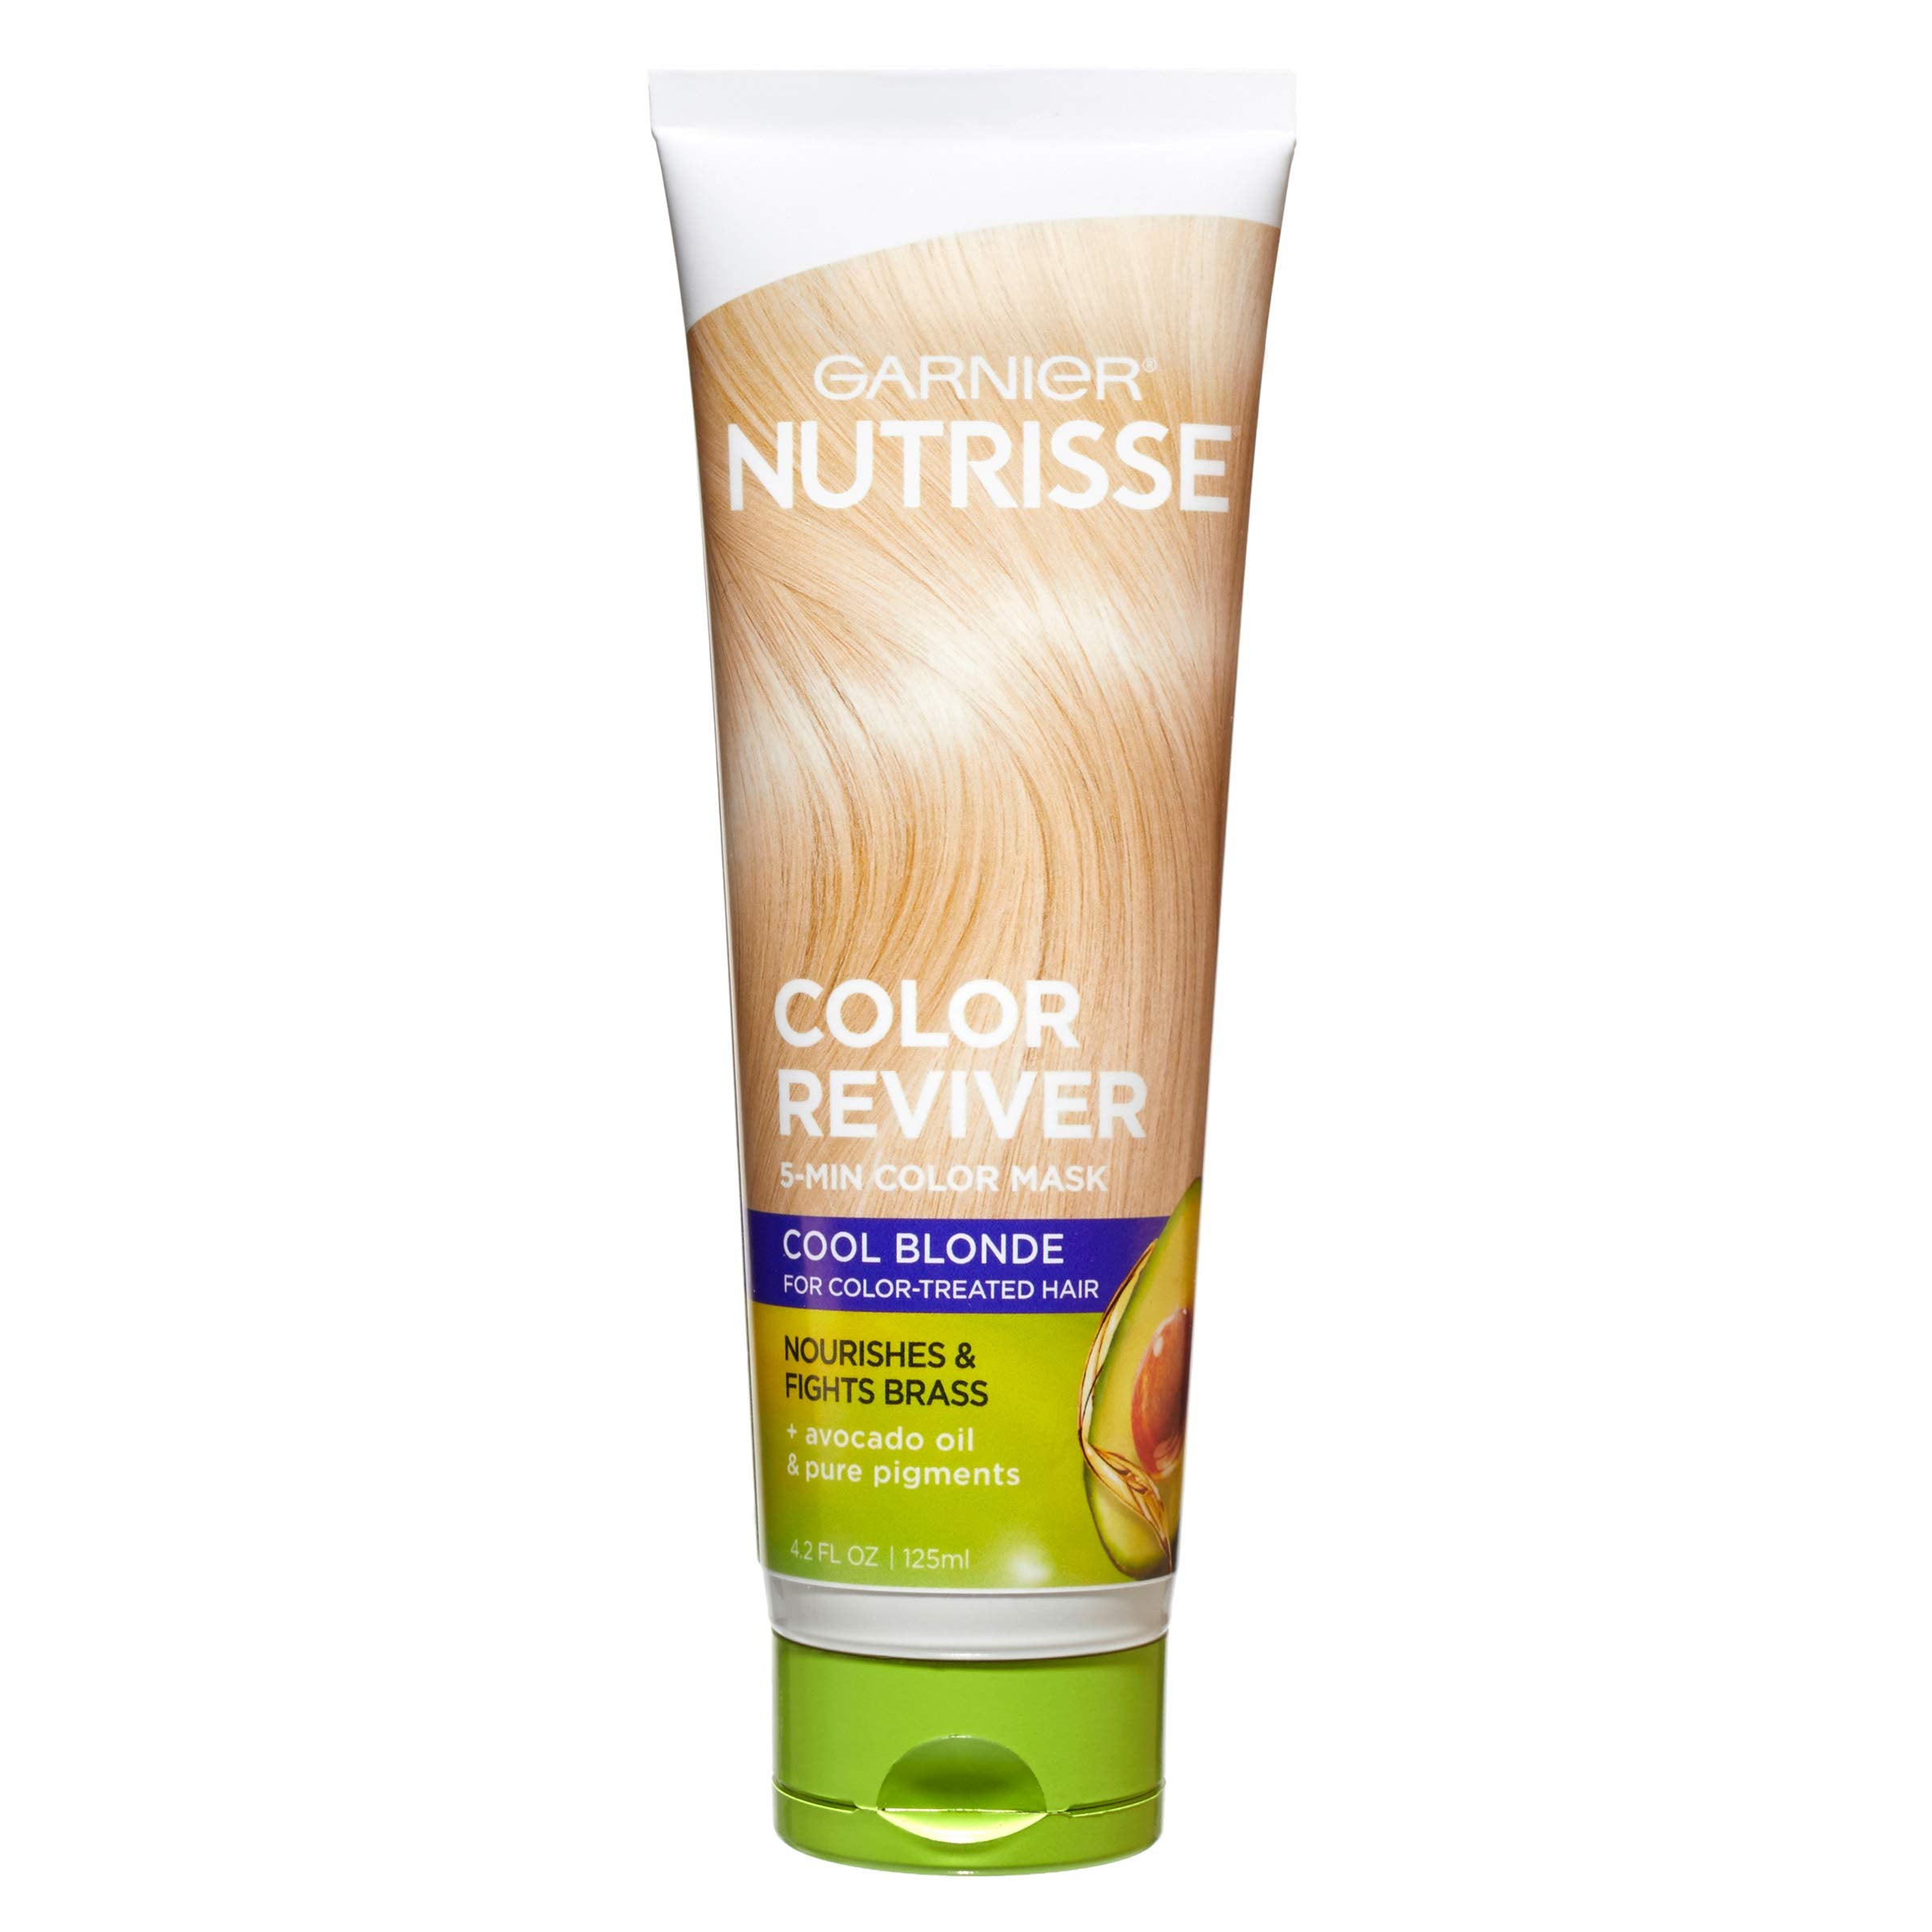 Garnier Nutrisse 5 Minute Nourishing Color Hair Mask with Triple Oils Delivers Day 1 Color Results, for Color Treated Hair, Cool Blonde, 4.2 fl. oz.